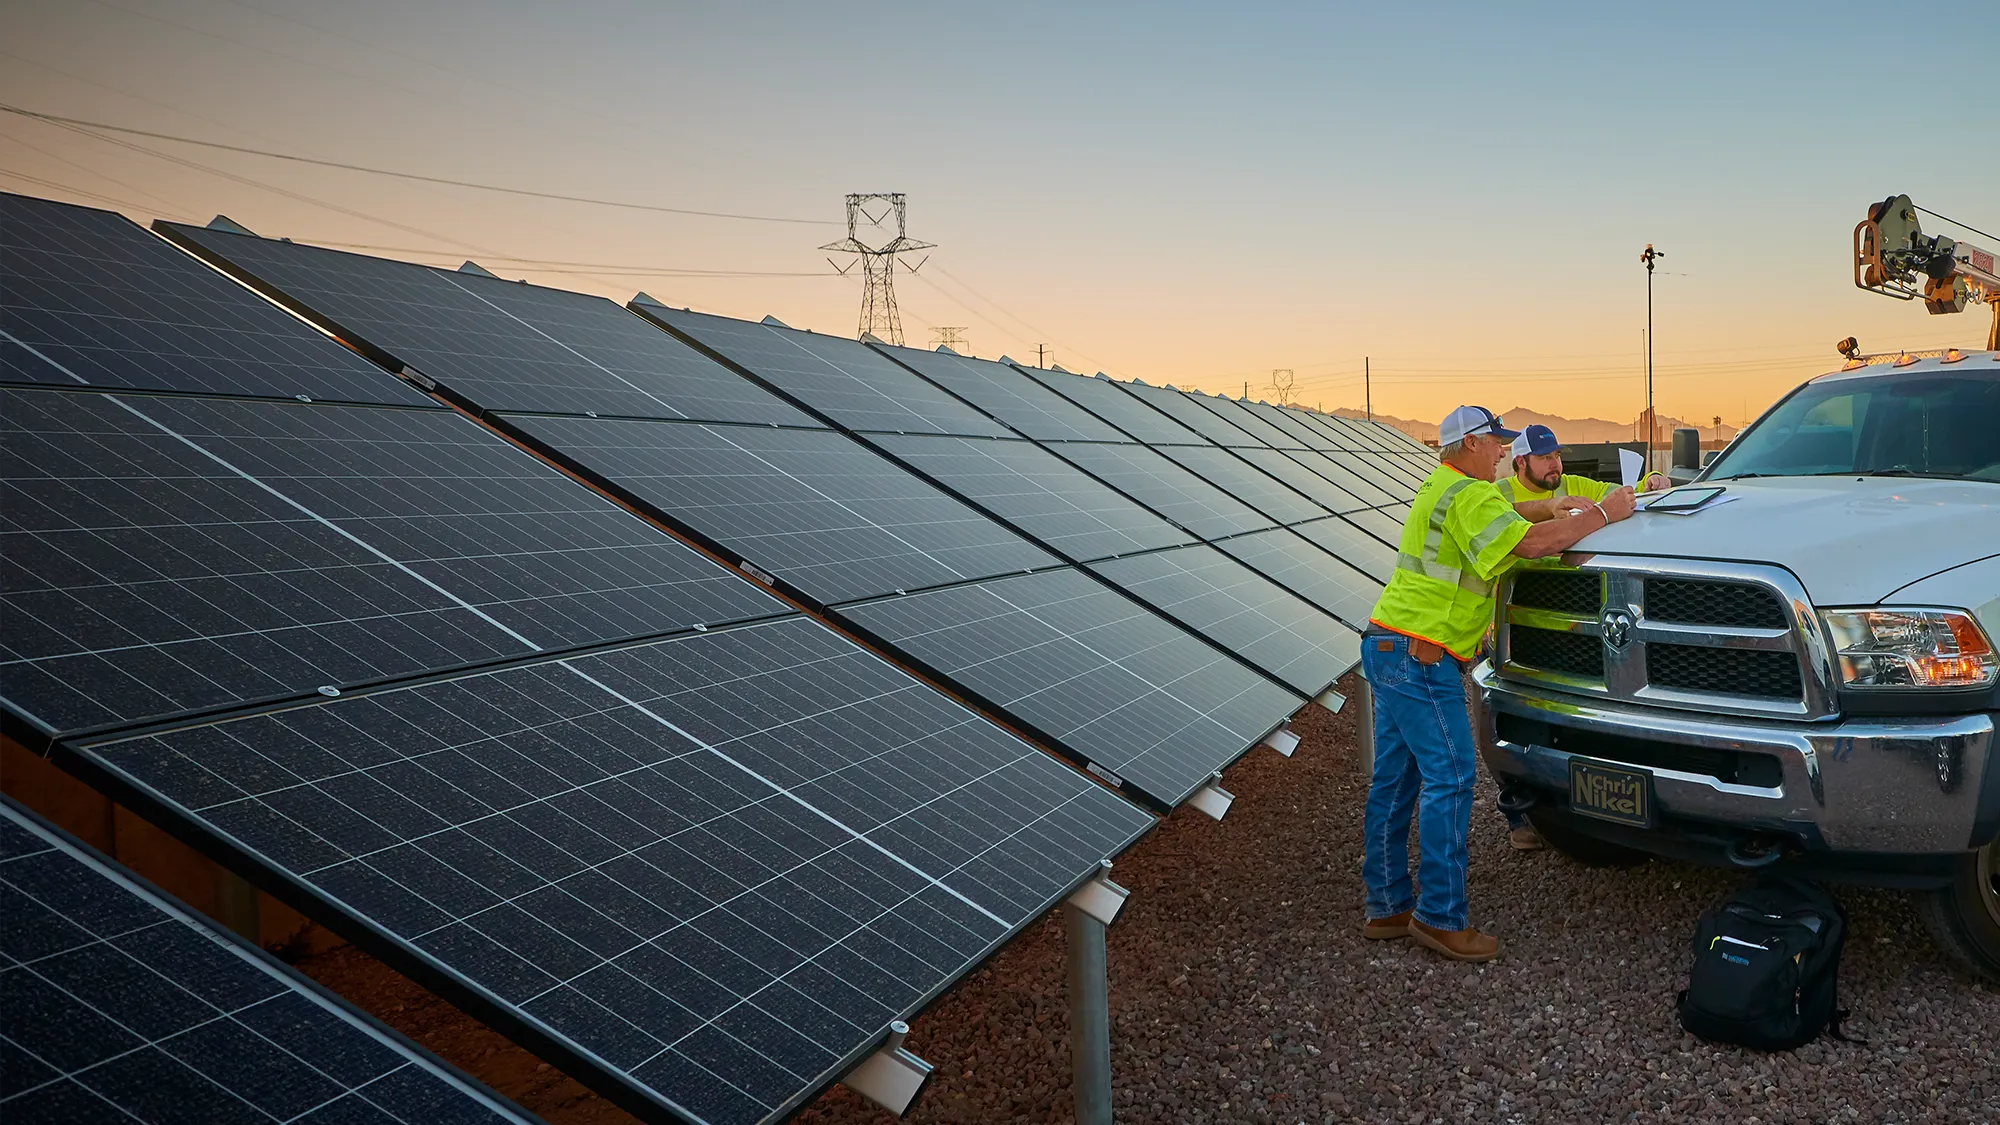 Two National Powerline employees standing in front of a row of solar panels.